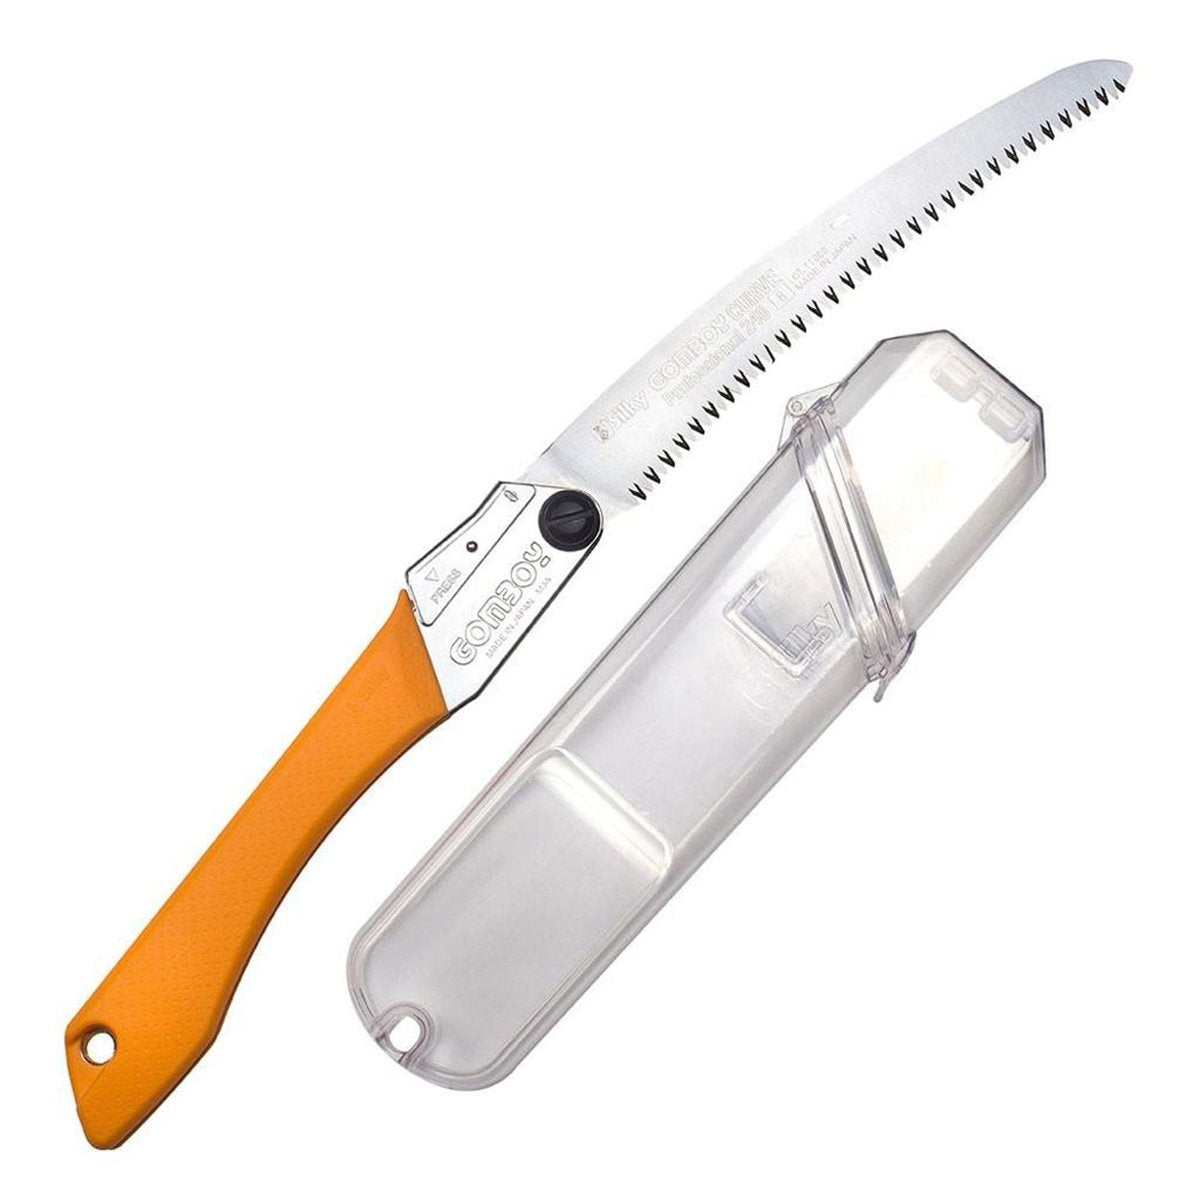 240mm Silky Gomboy folding saw with curved blade for pruning and orange rubber handle. With clear plastic storage case.